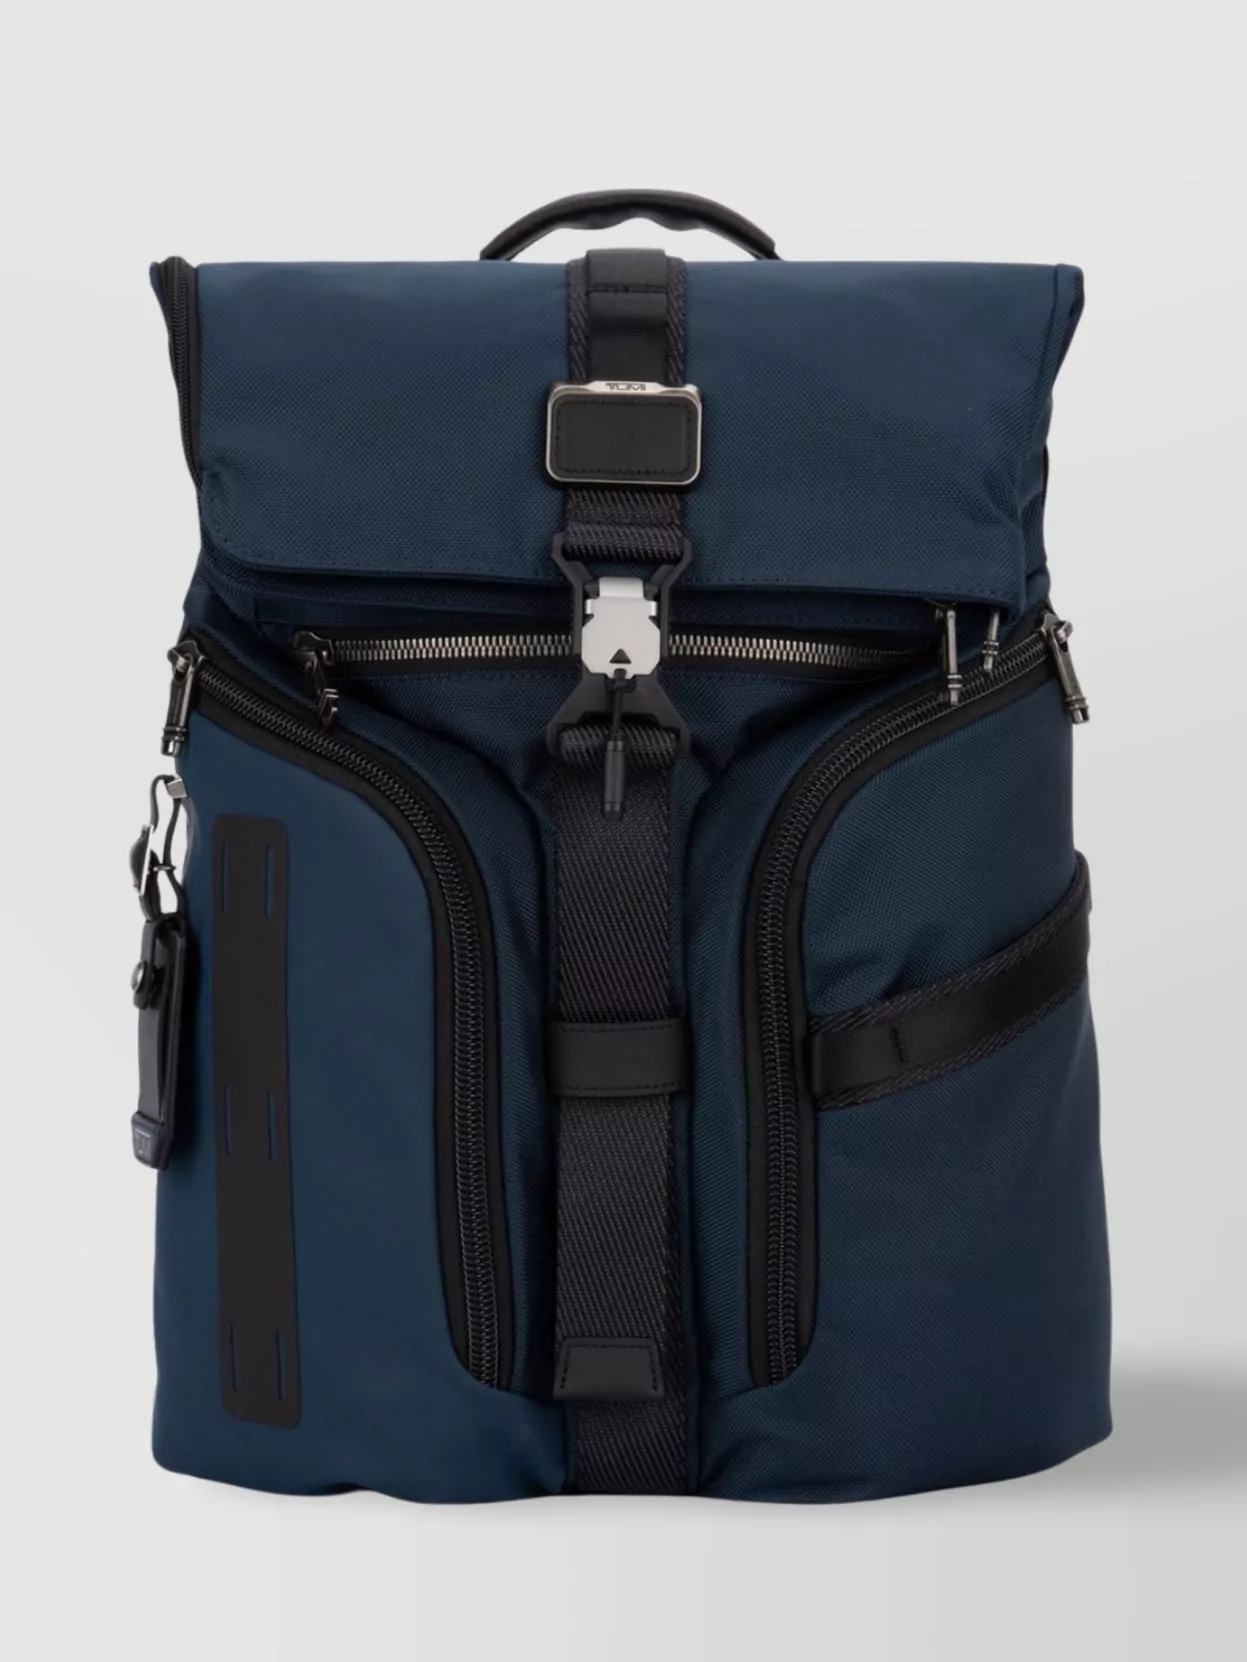 Shop Tumi Backpack With Adjustable Straps And Front Zip